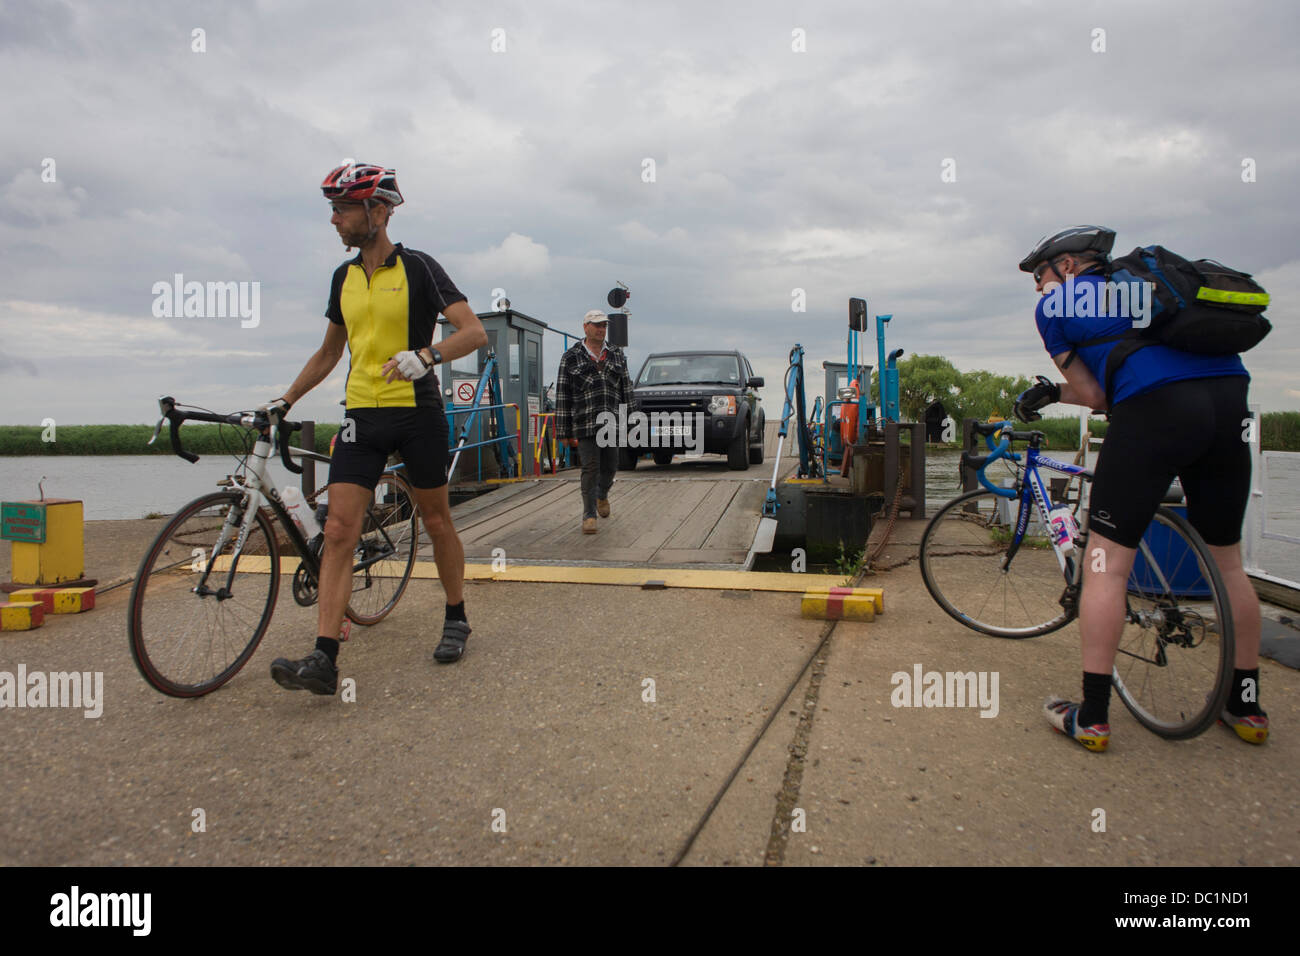 Cyclists disembarking and boarding the small chain ferry crossing the River Yare in Reedham on the Norfolk Broads. Stock Photo